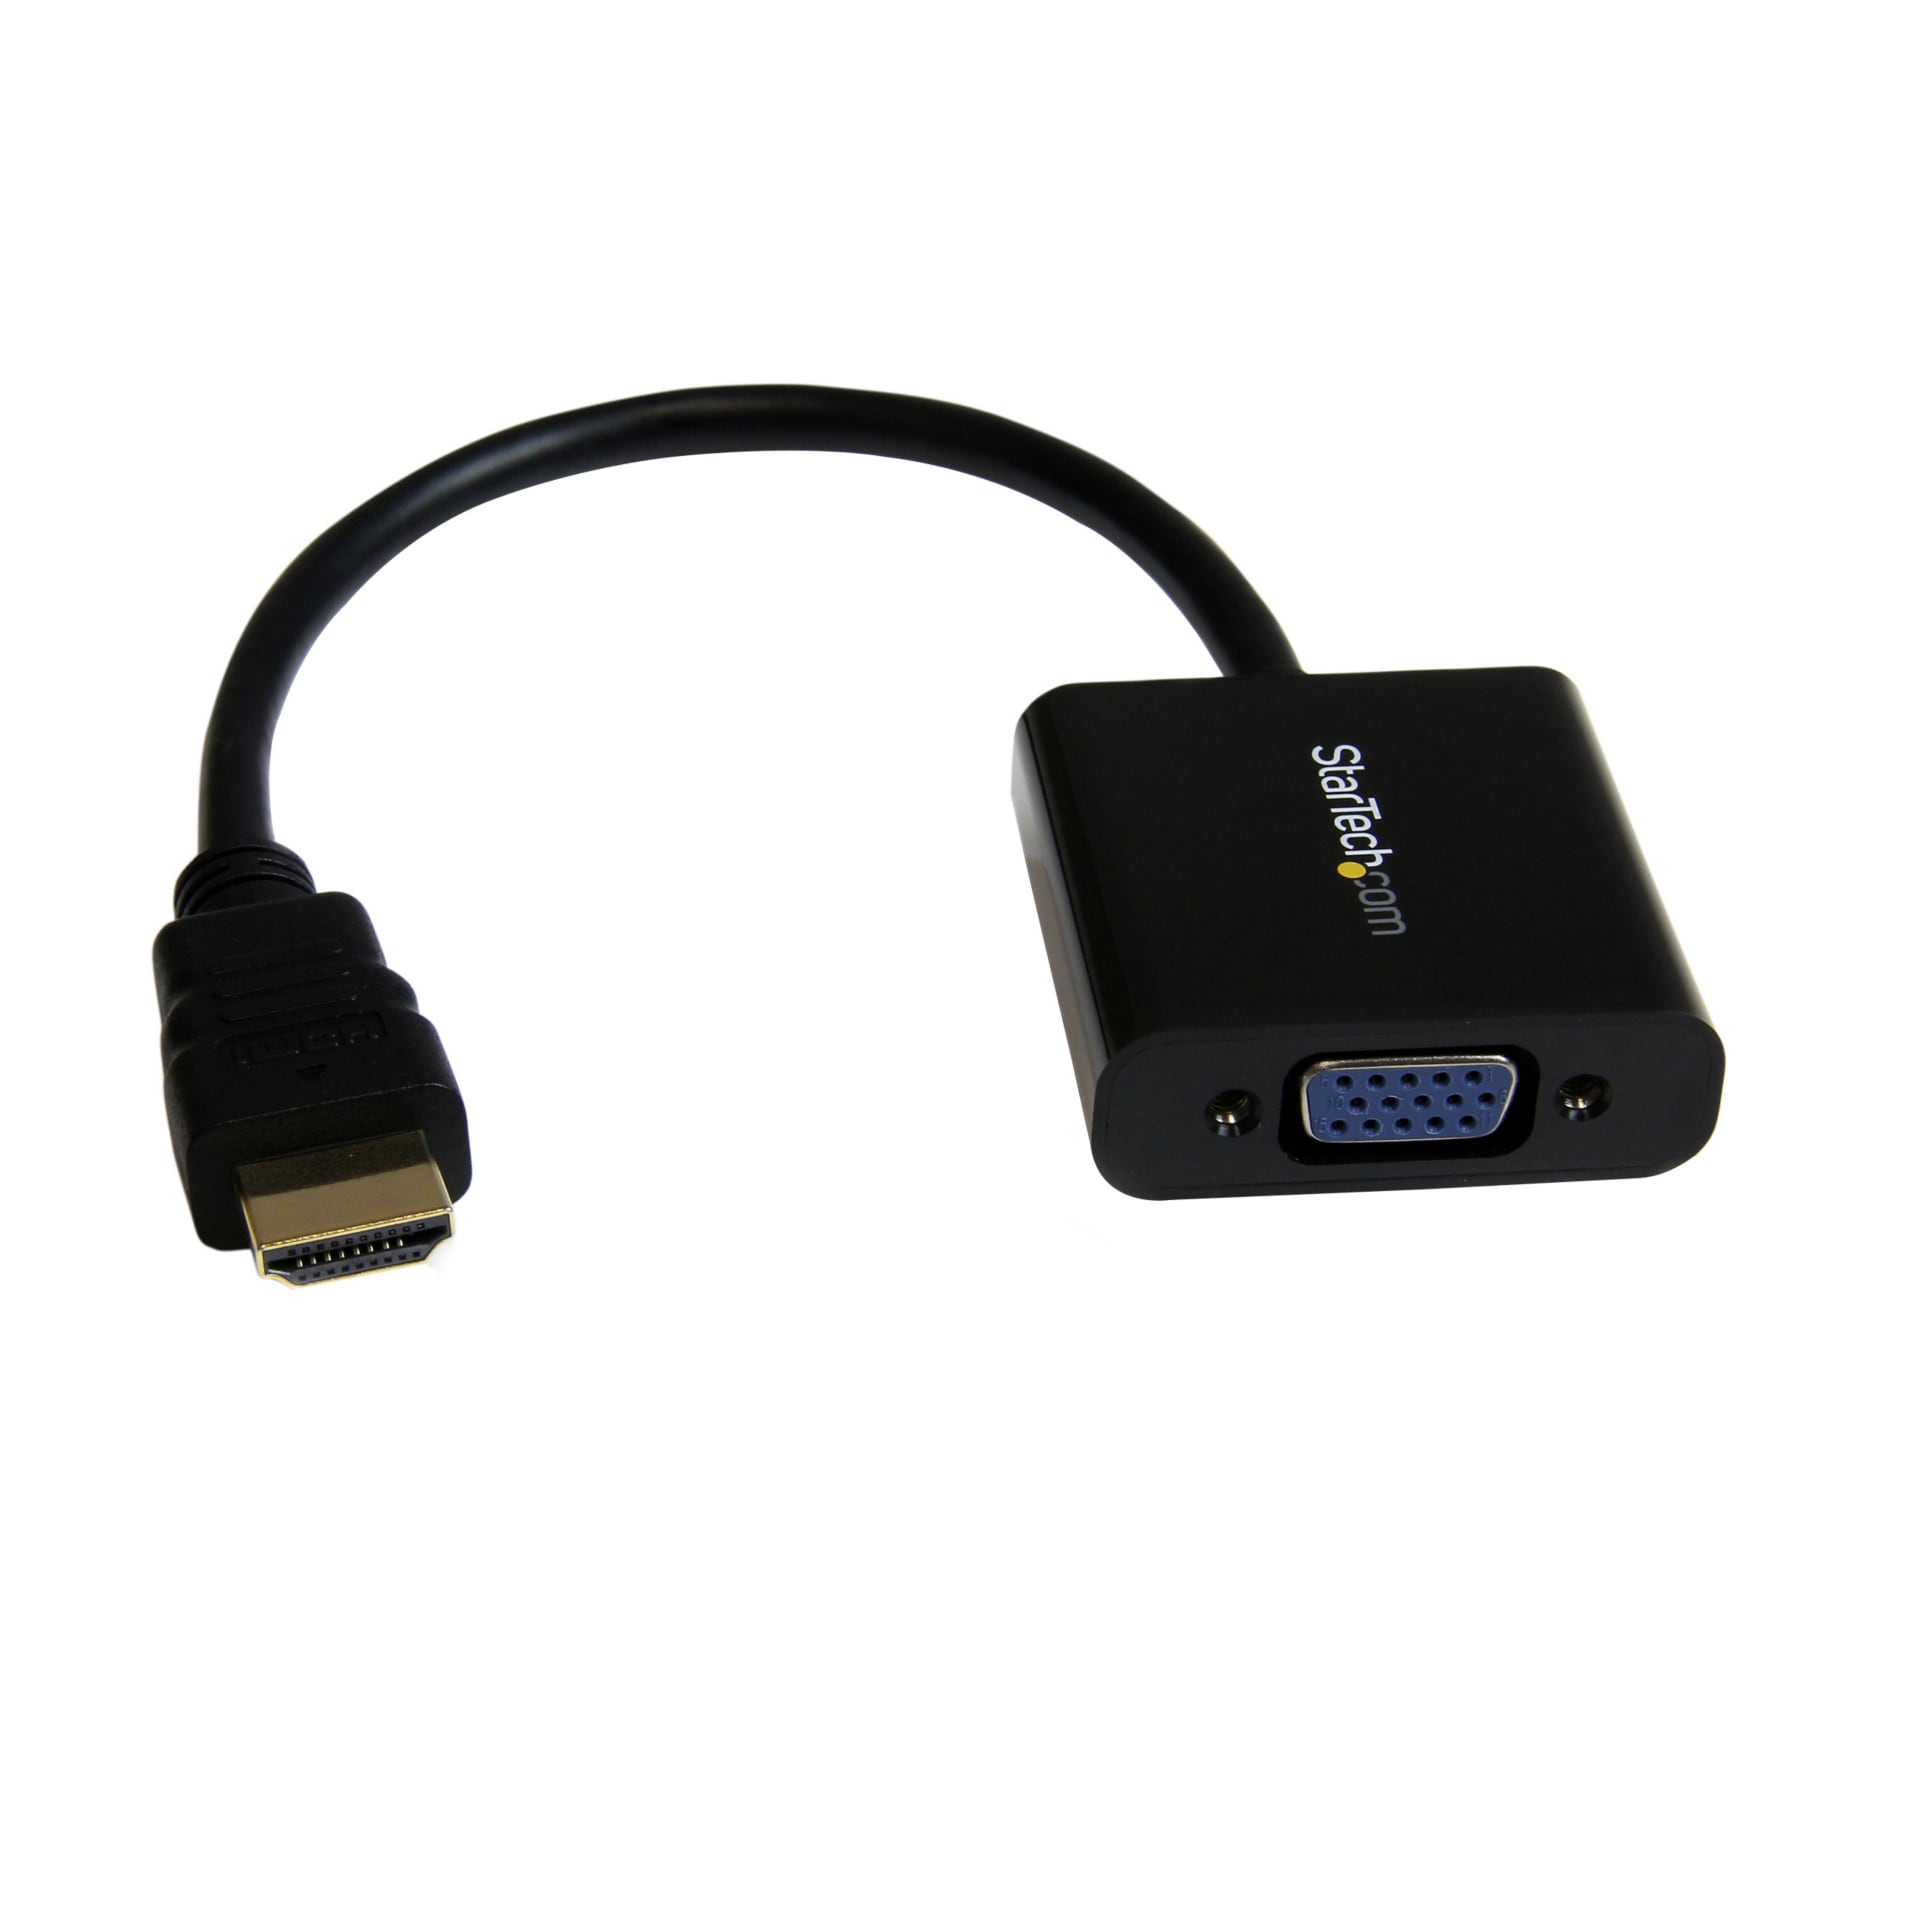 Alvast Ruwe olie Pellen StarTech.com HDMI to VGA Adapter - Active Monitor Converter Cable - 1080p -  HD2VGAE2 - Monitor Cables & Adapters - CDW.com